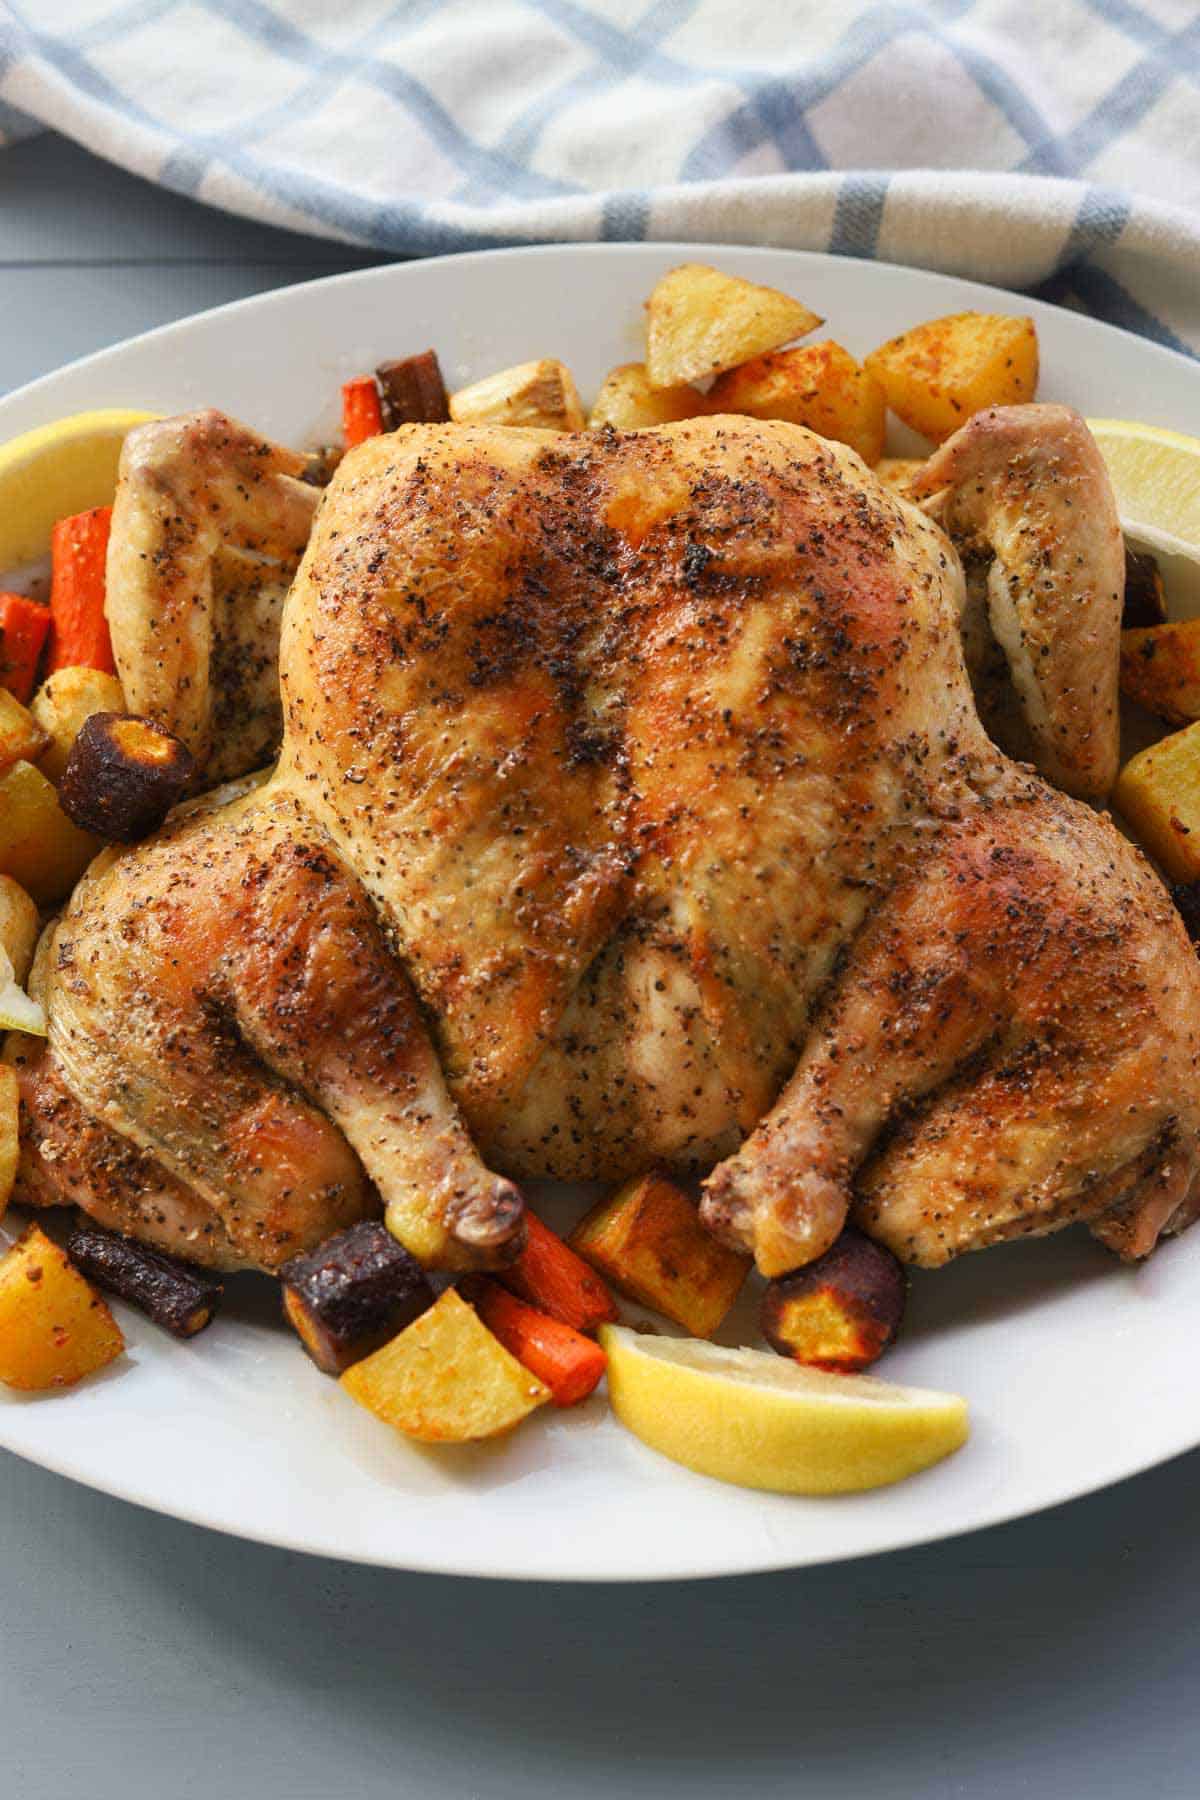 Roasted chicken with cooked vegetables garnished with lemon